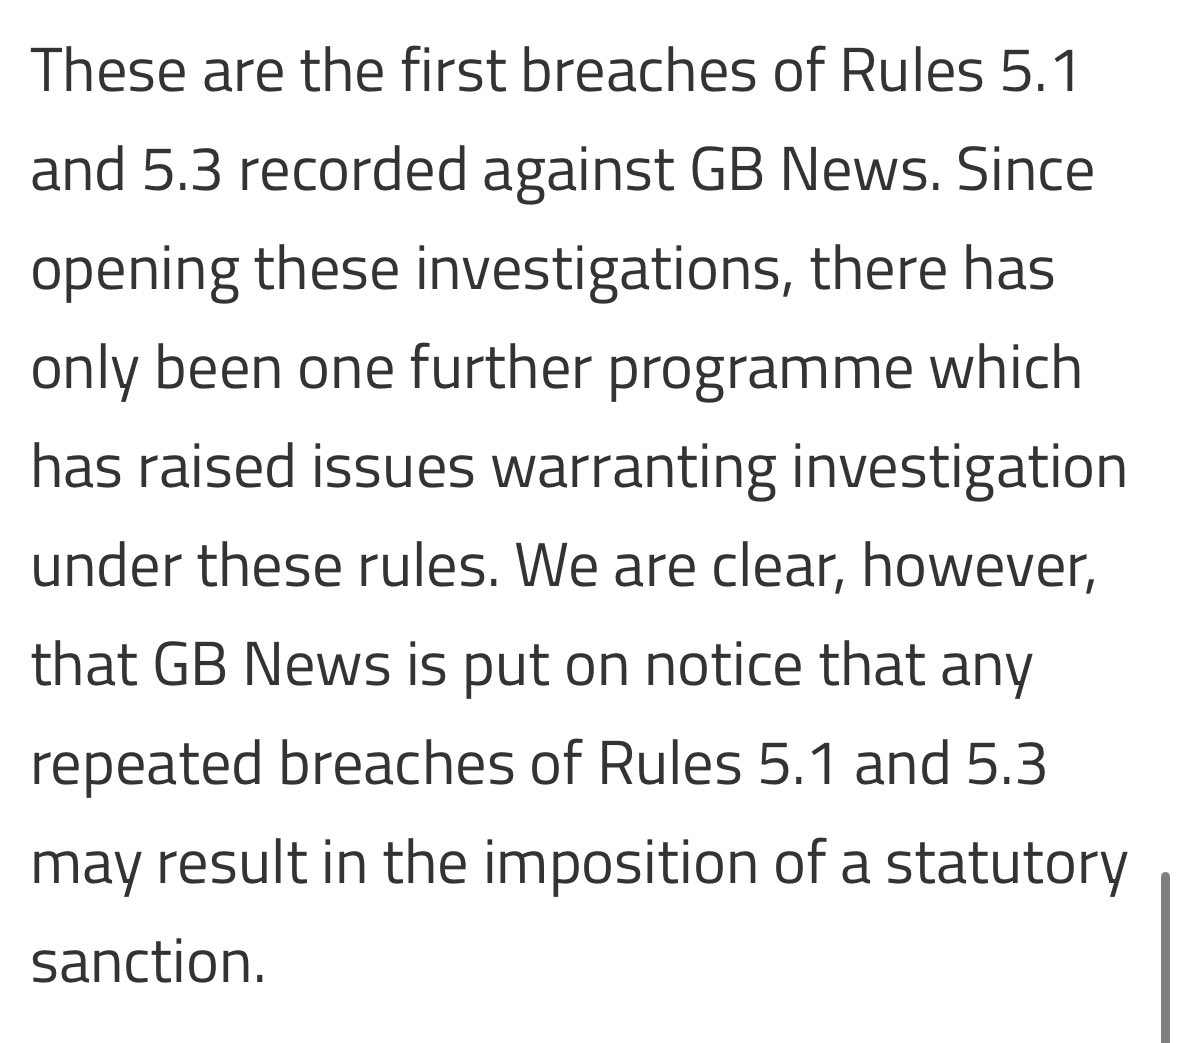 Ofcom finds five GB News programmes breached their impartiality rules by using Conservative MPs as newsreaders. Their punishment? Another stern letter warning they might act against them in the future